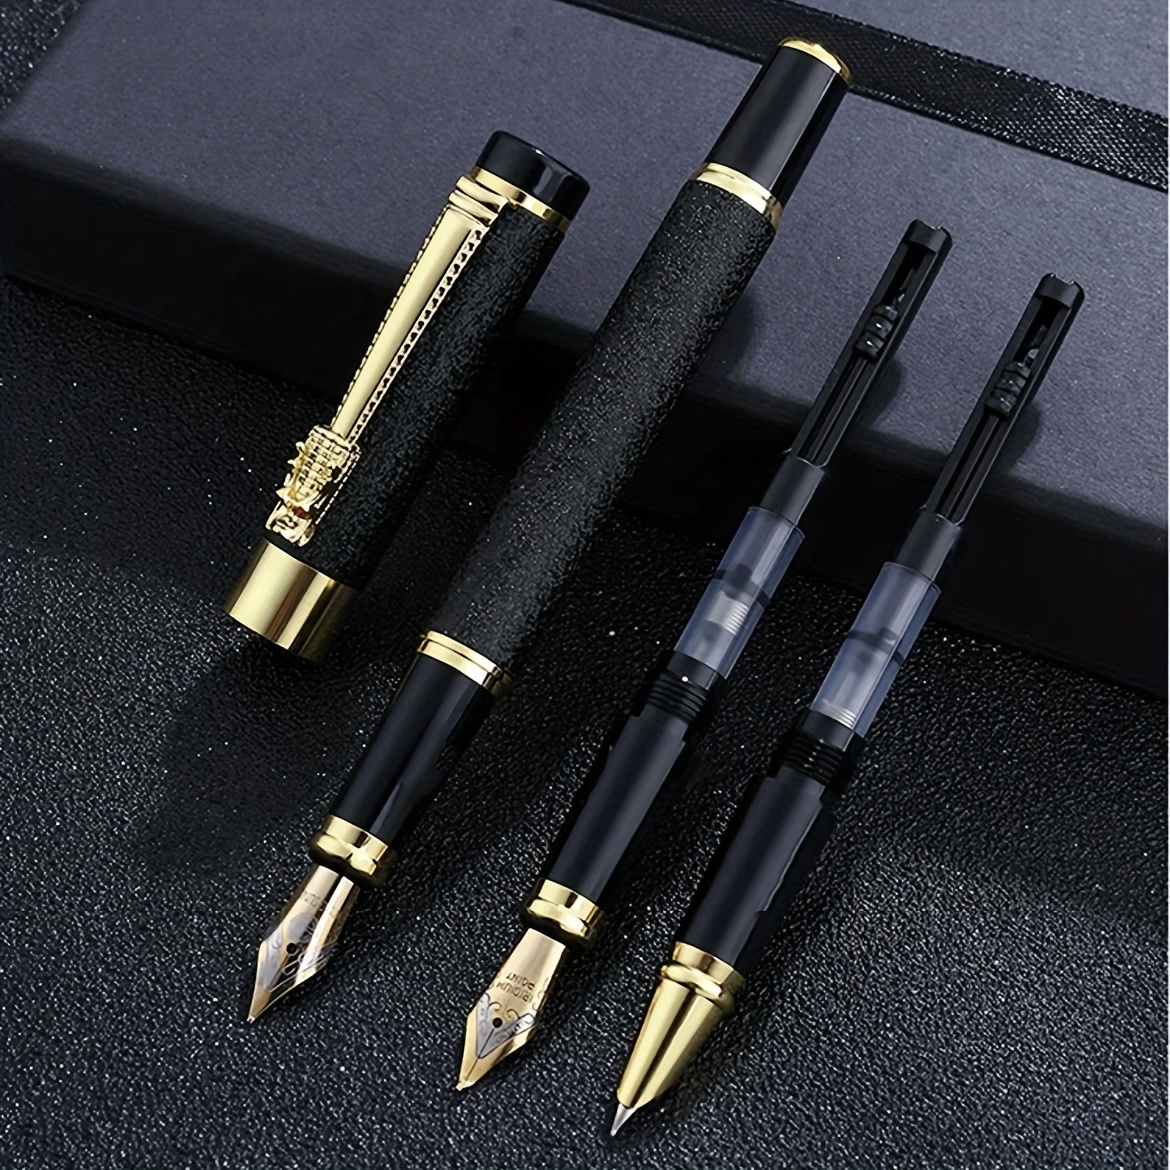 

3pcs/box Matte Metal Fountain Pen, Daily Writing Business Office Iridium Nib 0.38mm/0.5mm/1.0mm, Pen For Writting Practice - Perfect For Calligraphy Practice & Wonderful Surprise Gifts!